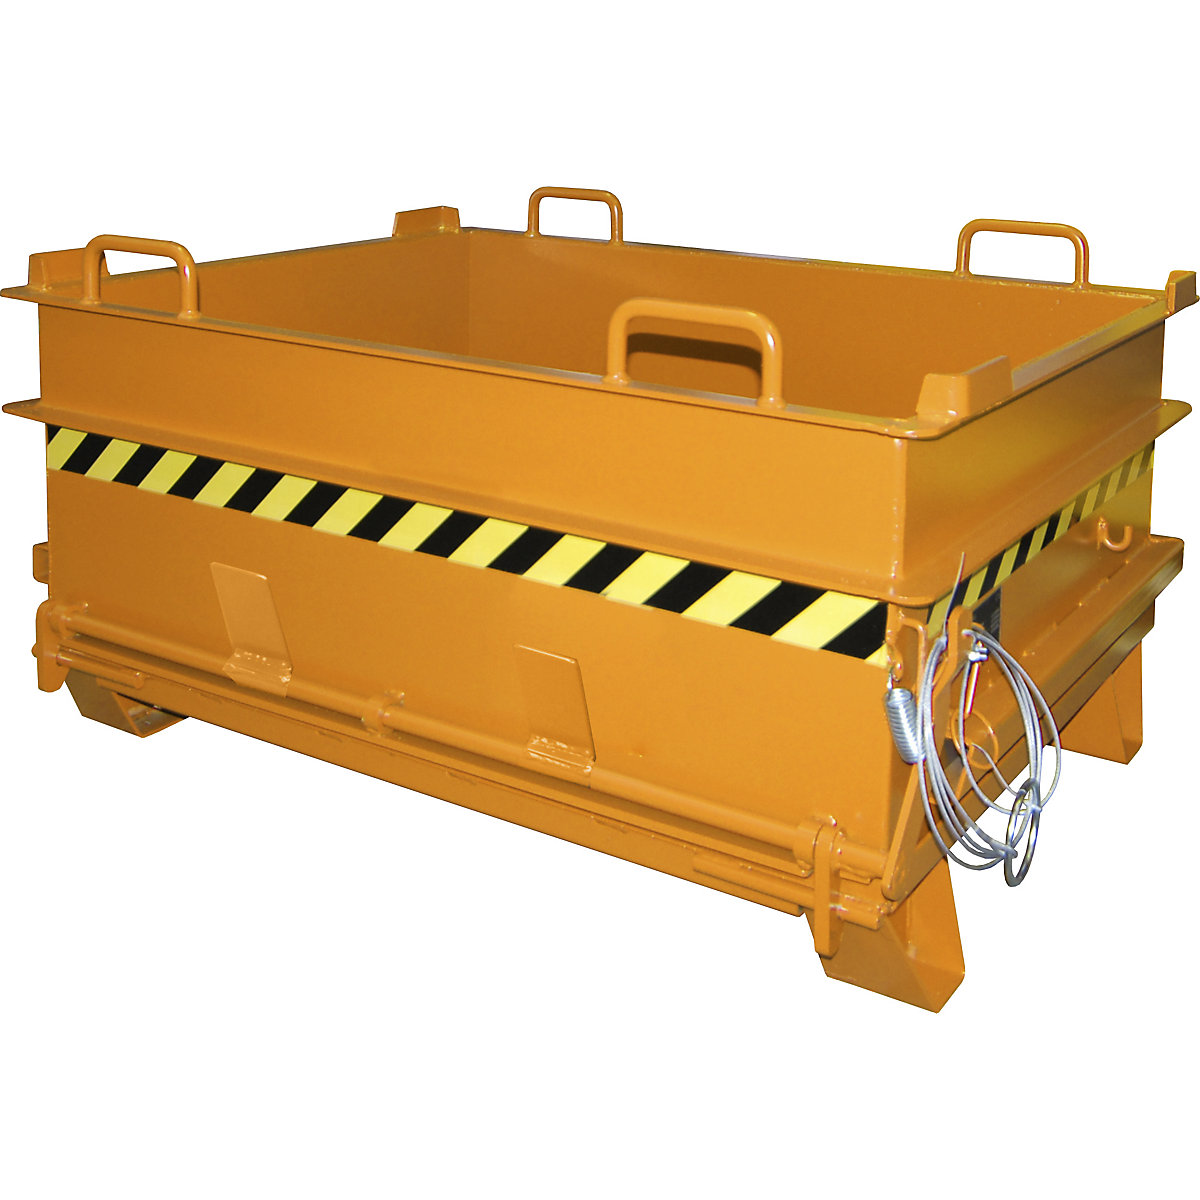 BC construction material container, with stone clamp release mechanism – eurokraft pro, WxH 1305 x 700 mm, yellow orange-3